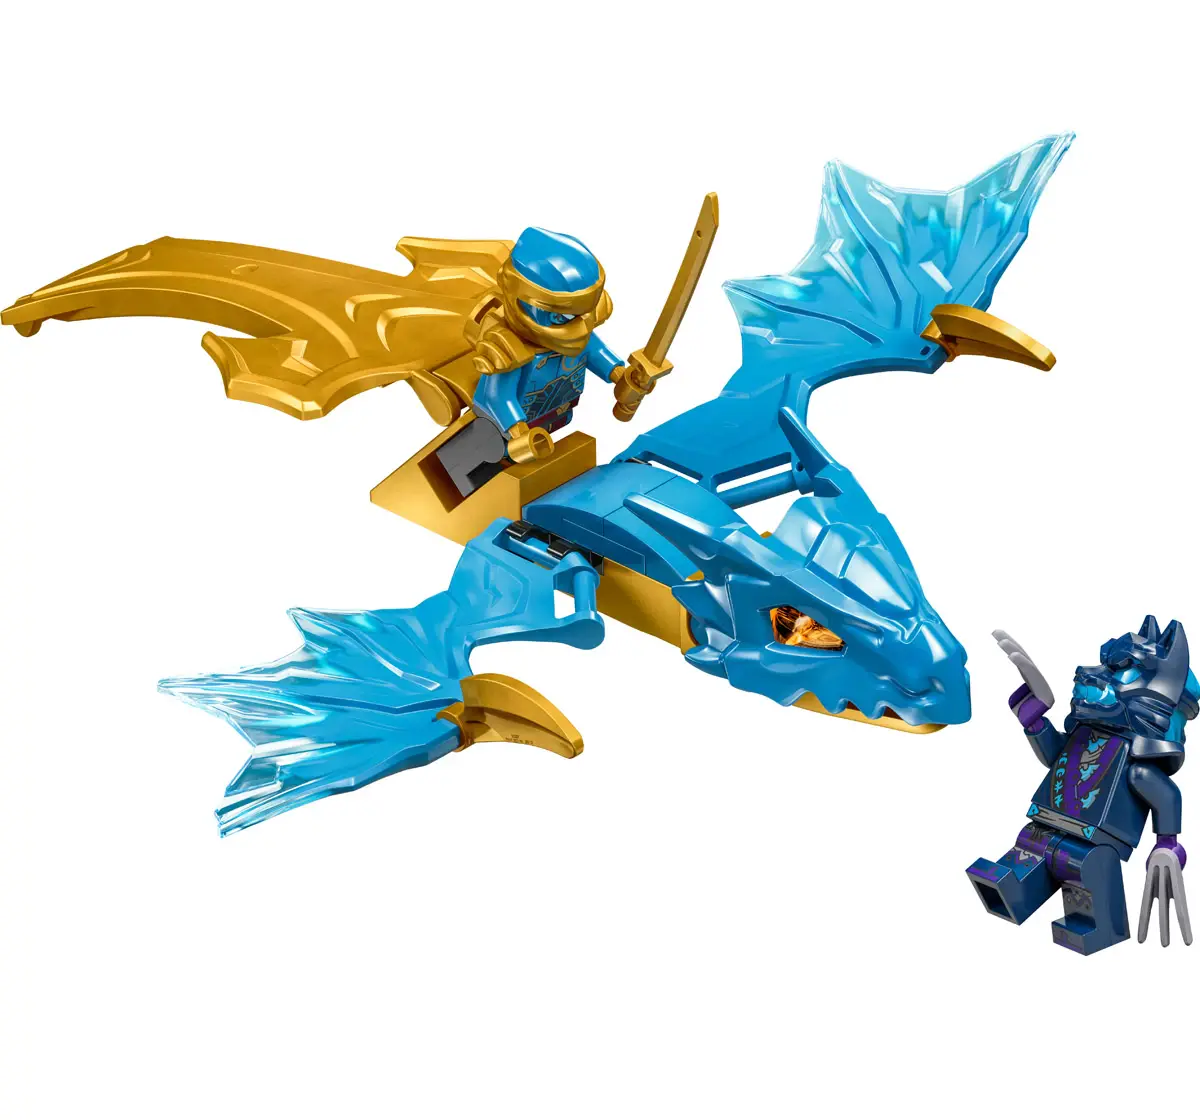 Lego Ninjago NyaS Rising Dragon Strike Toy 71802 Multicolour For Kids Ages 6Y+ (26 Pieces) 